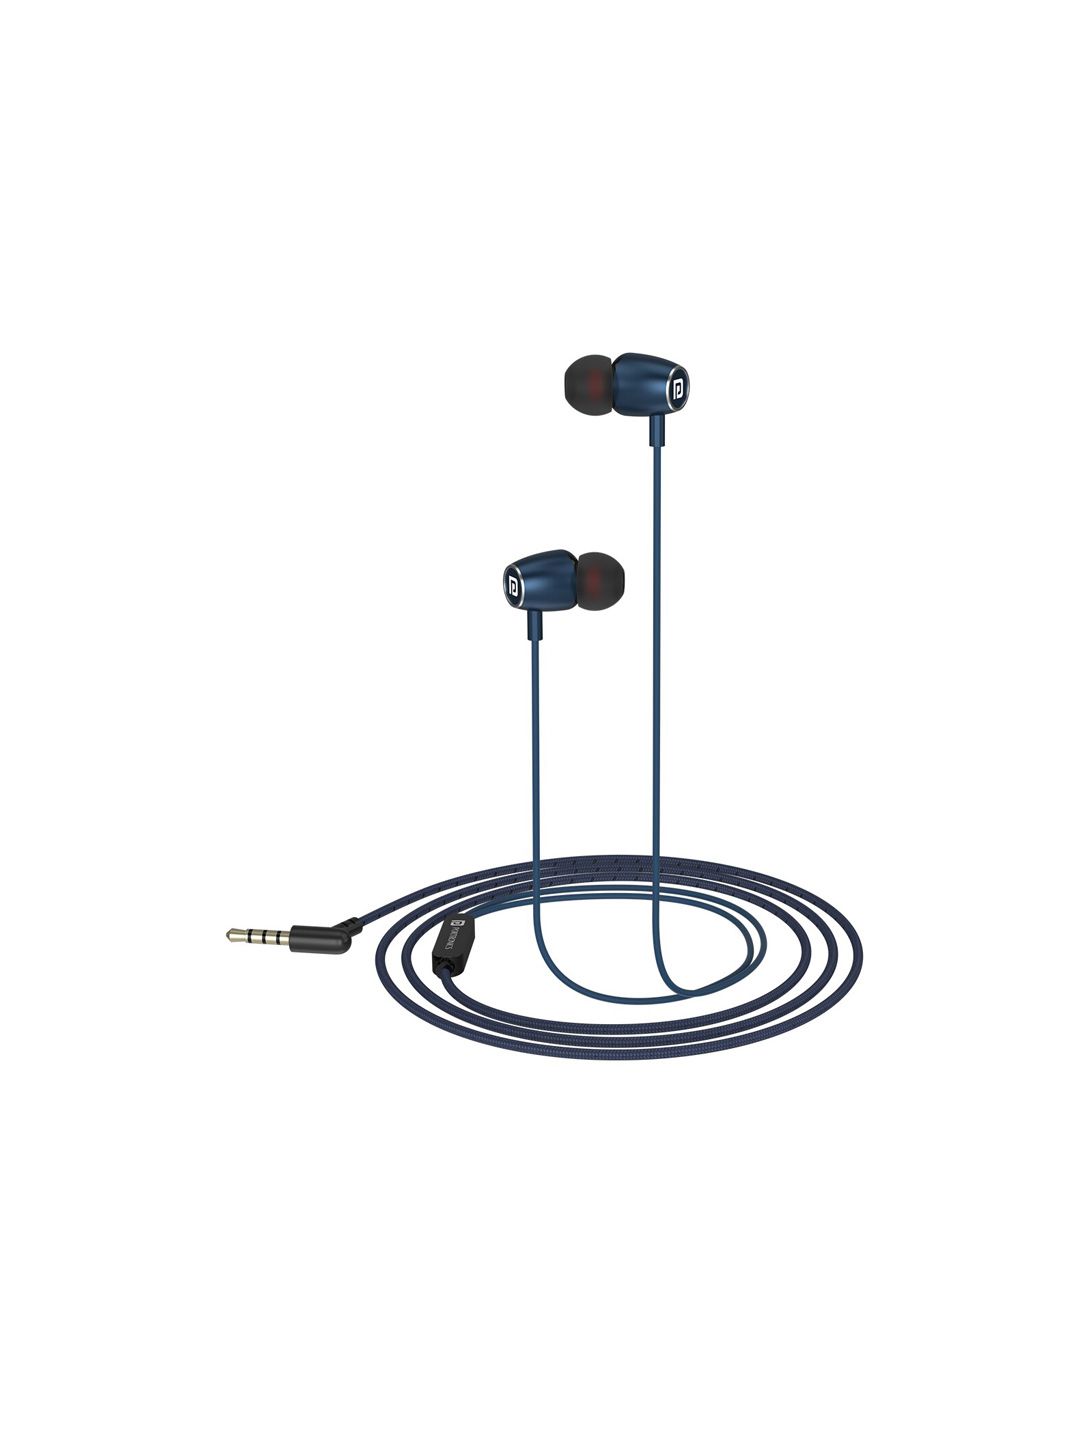 Portronics Blue Solid Conch 90 In Ear Wired Earphones With Mic Price in India